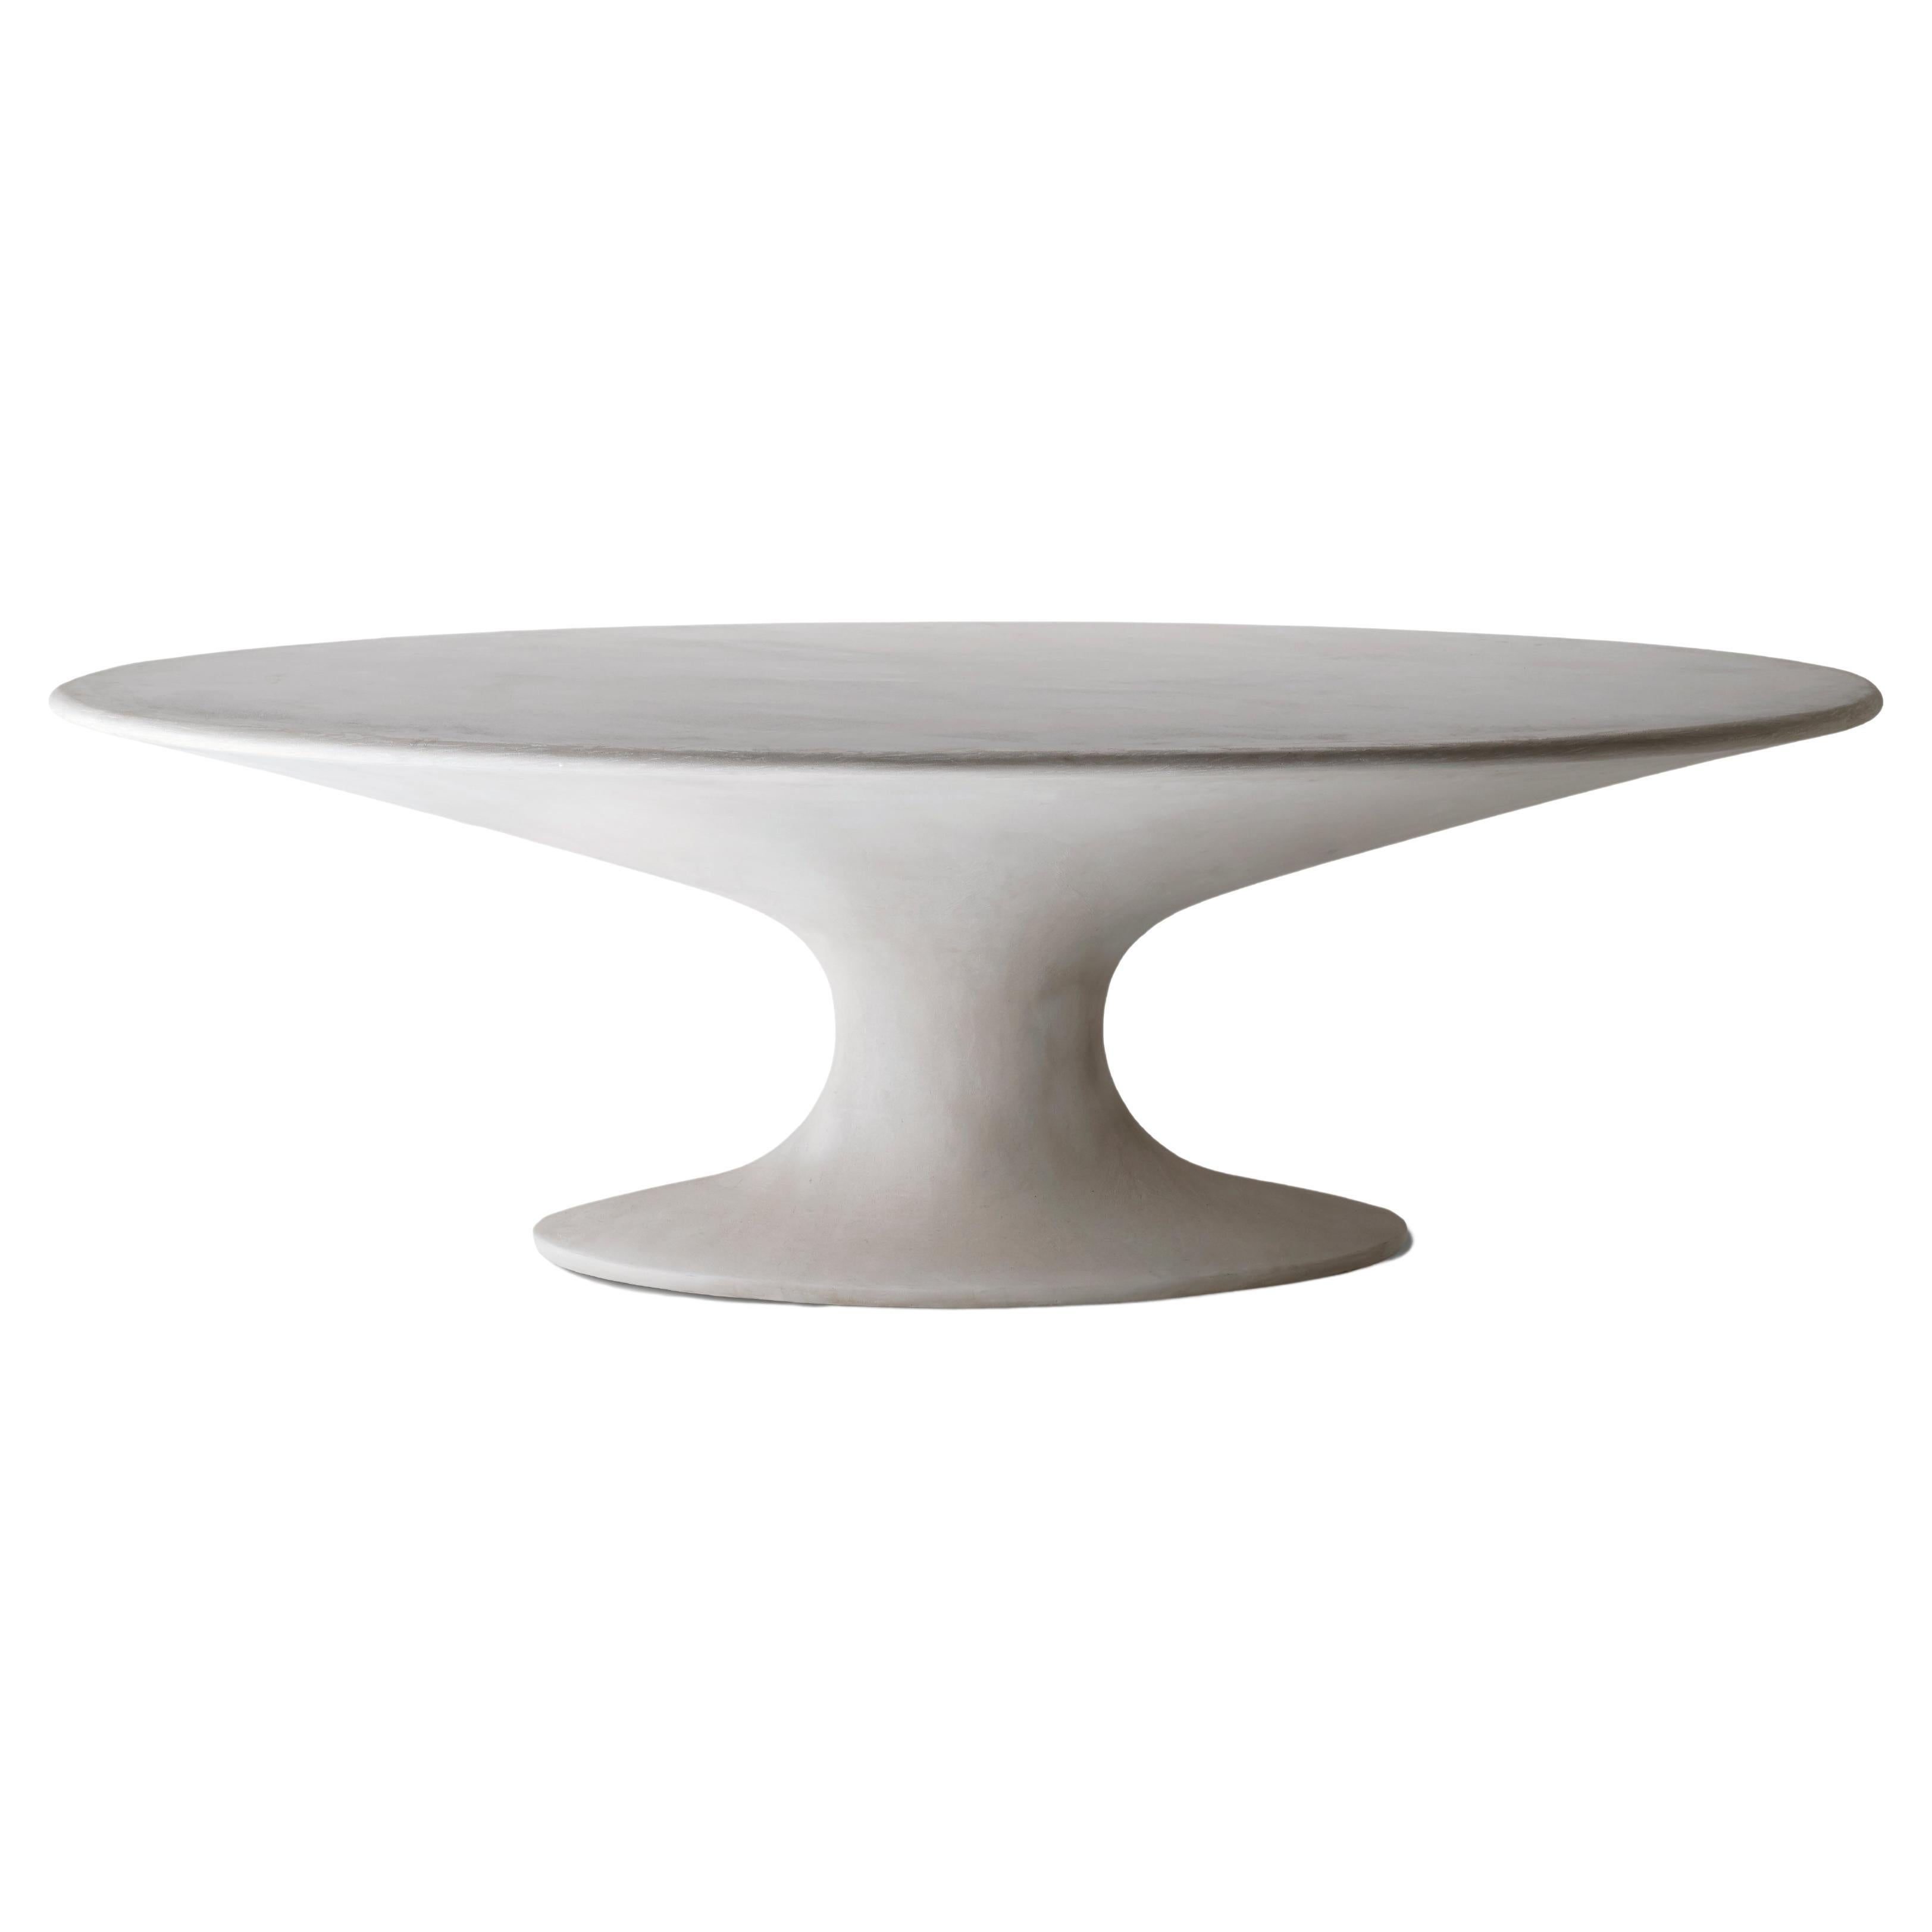 Zanotta Fenice Table in Grey Shade Polimex with Acryl Finish by Piero Bottoni For Sale